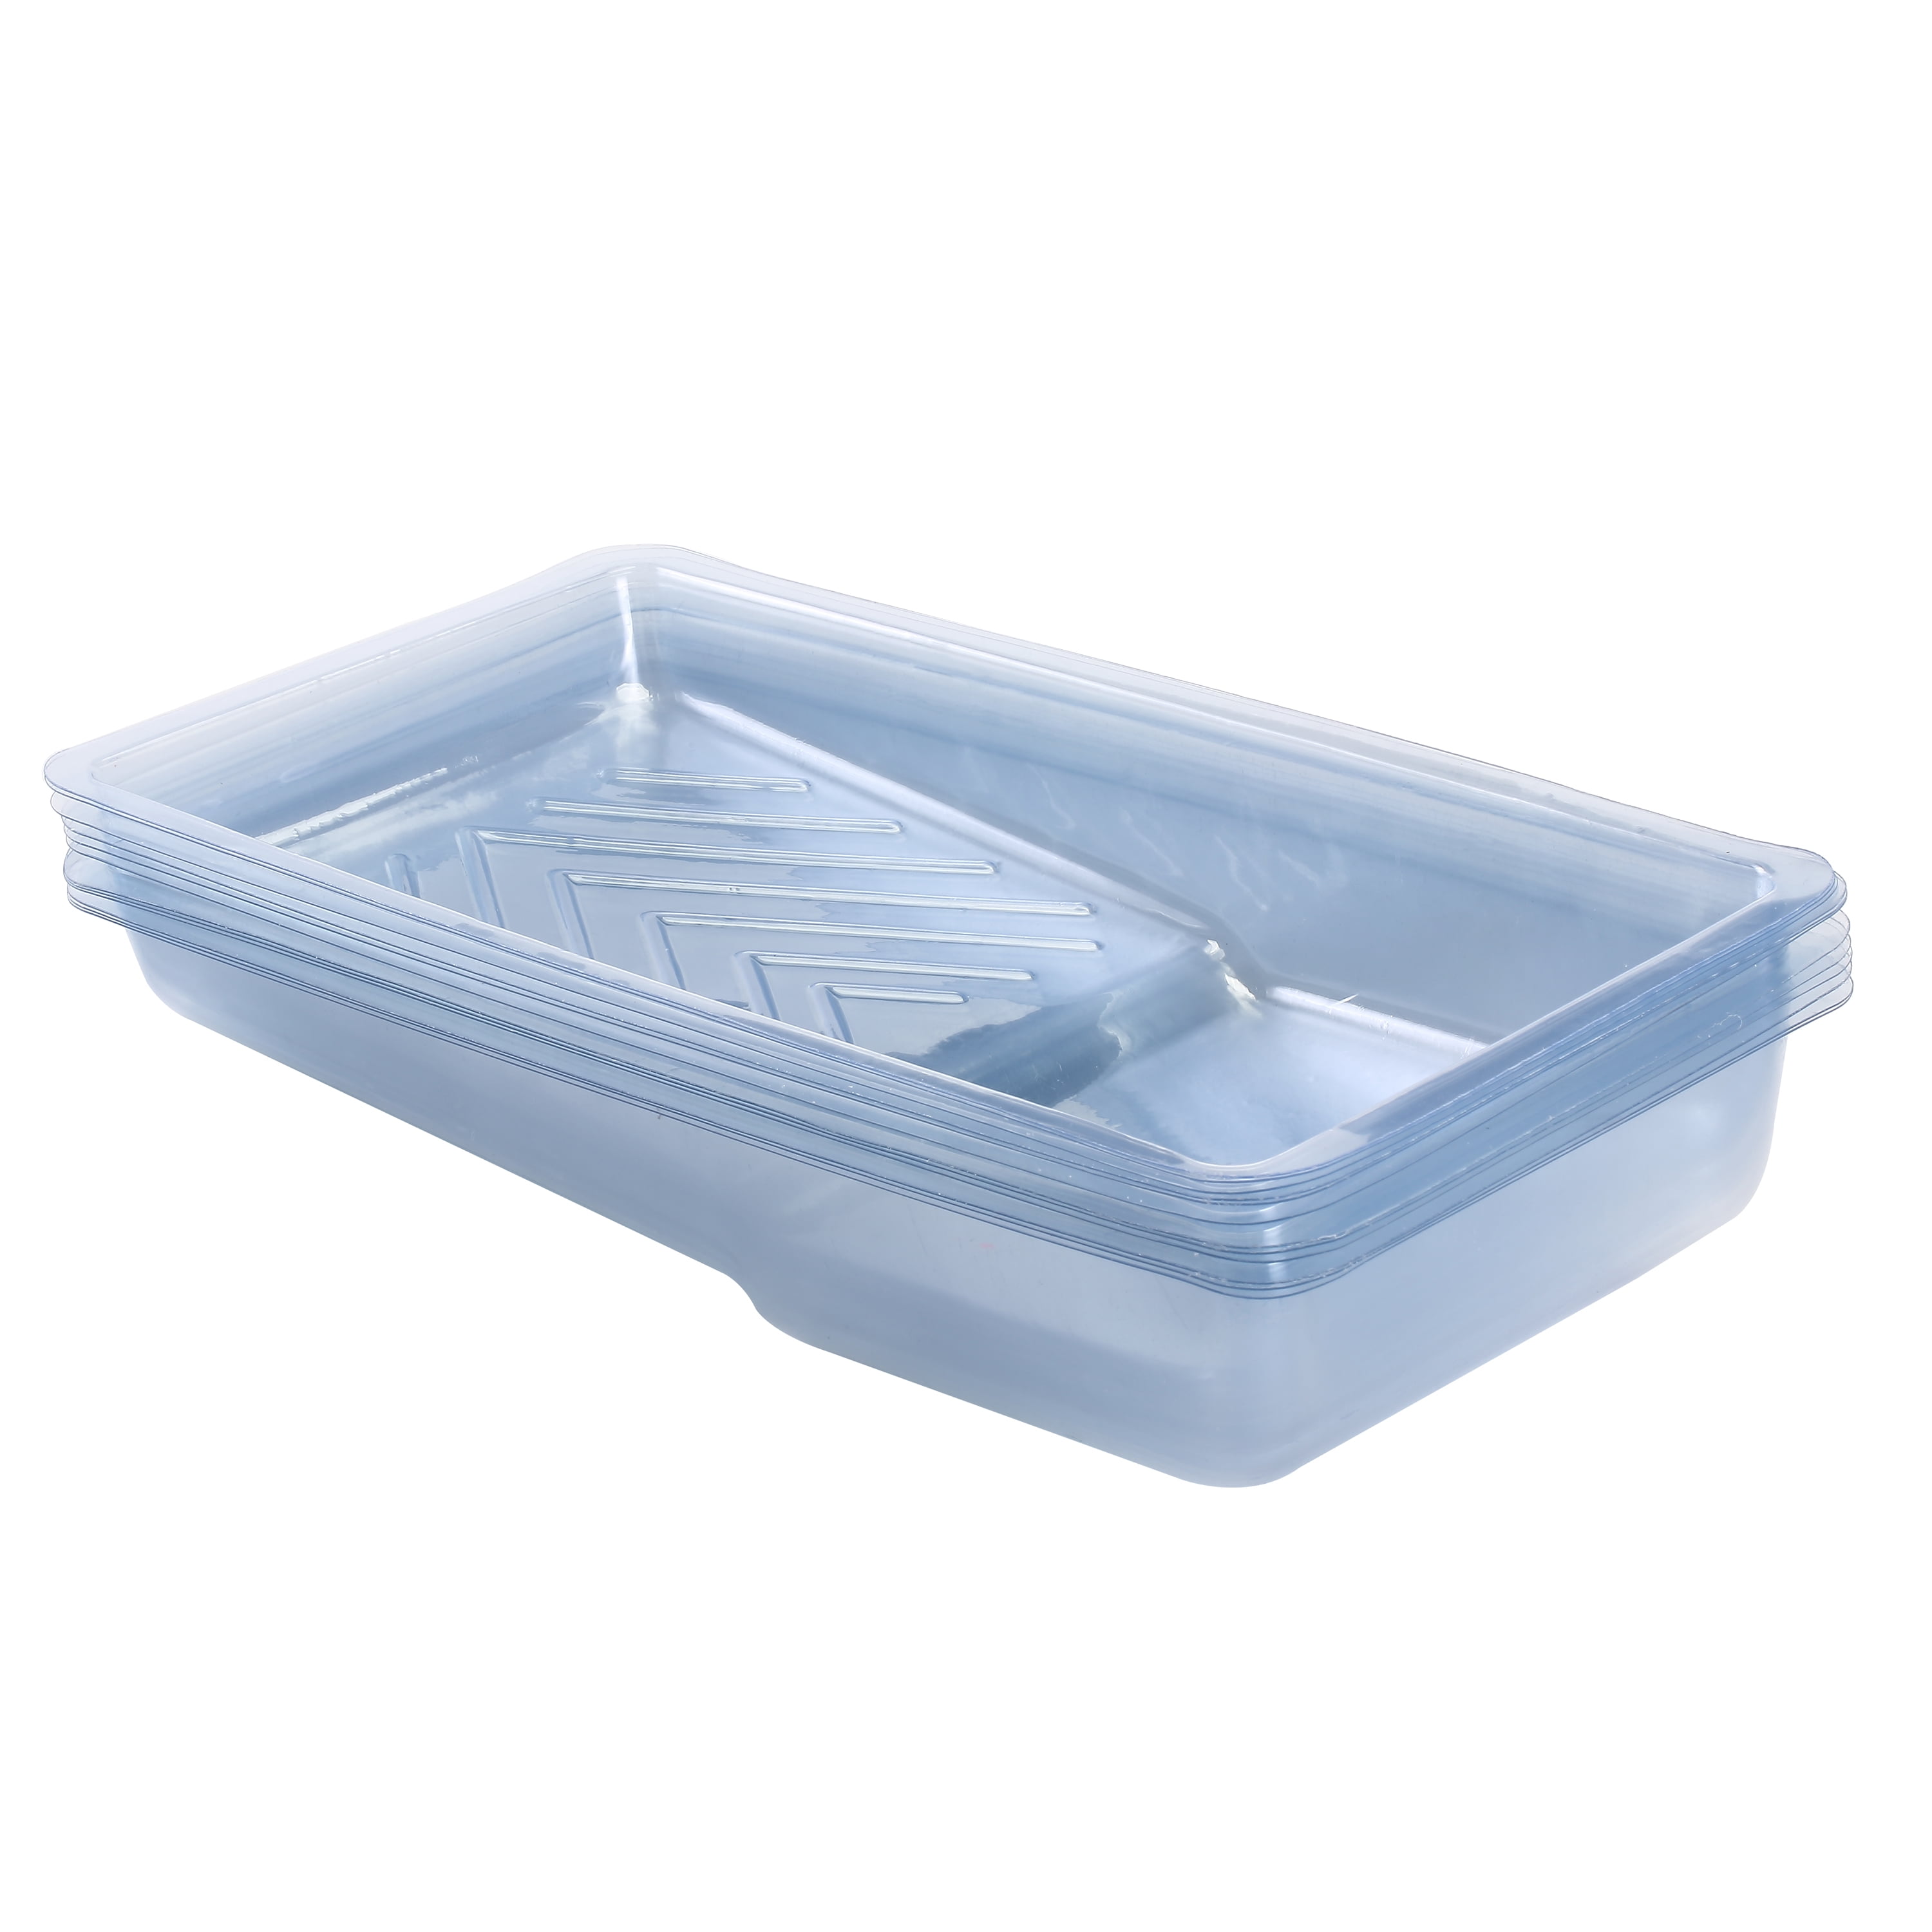 Whizz 11-in x 6-in Paint Tray in Clear | 93500